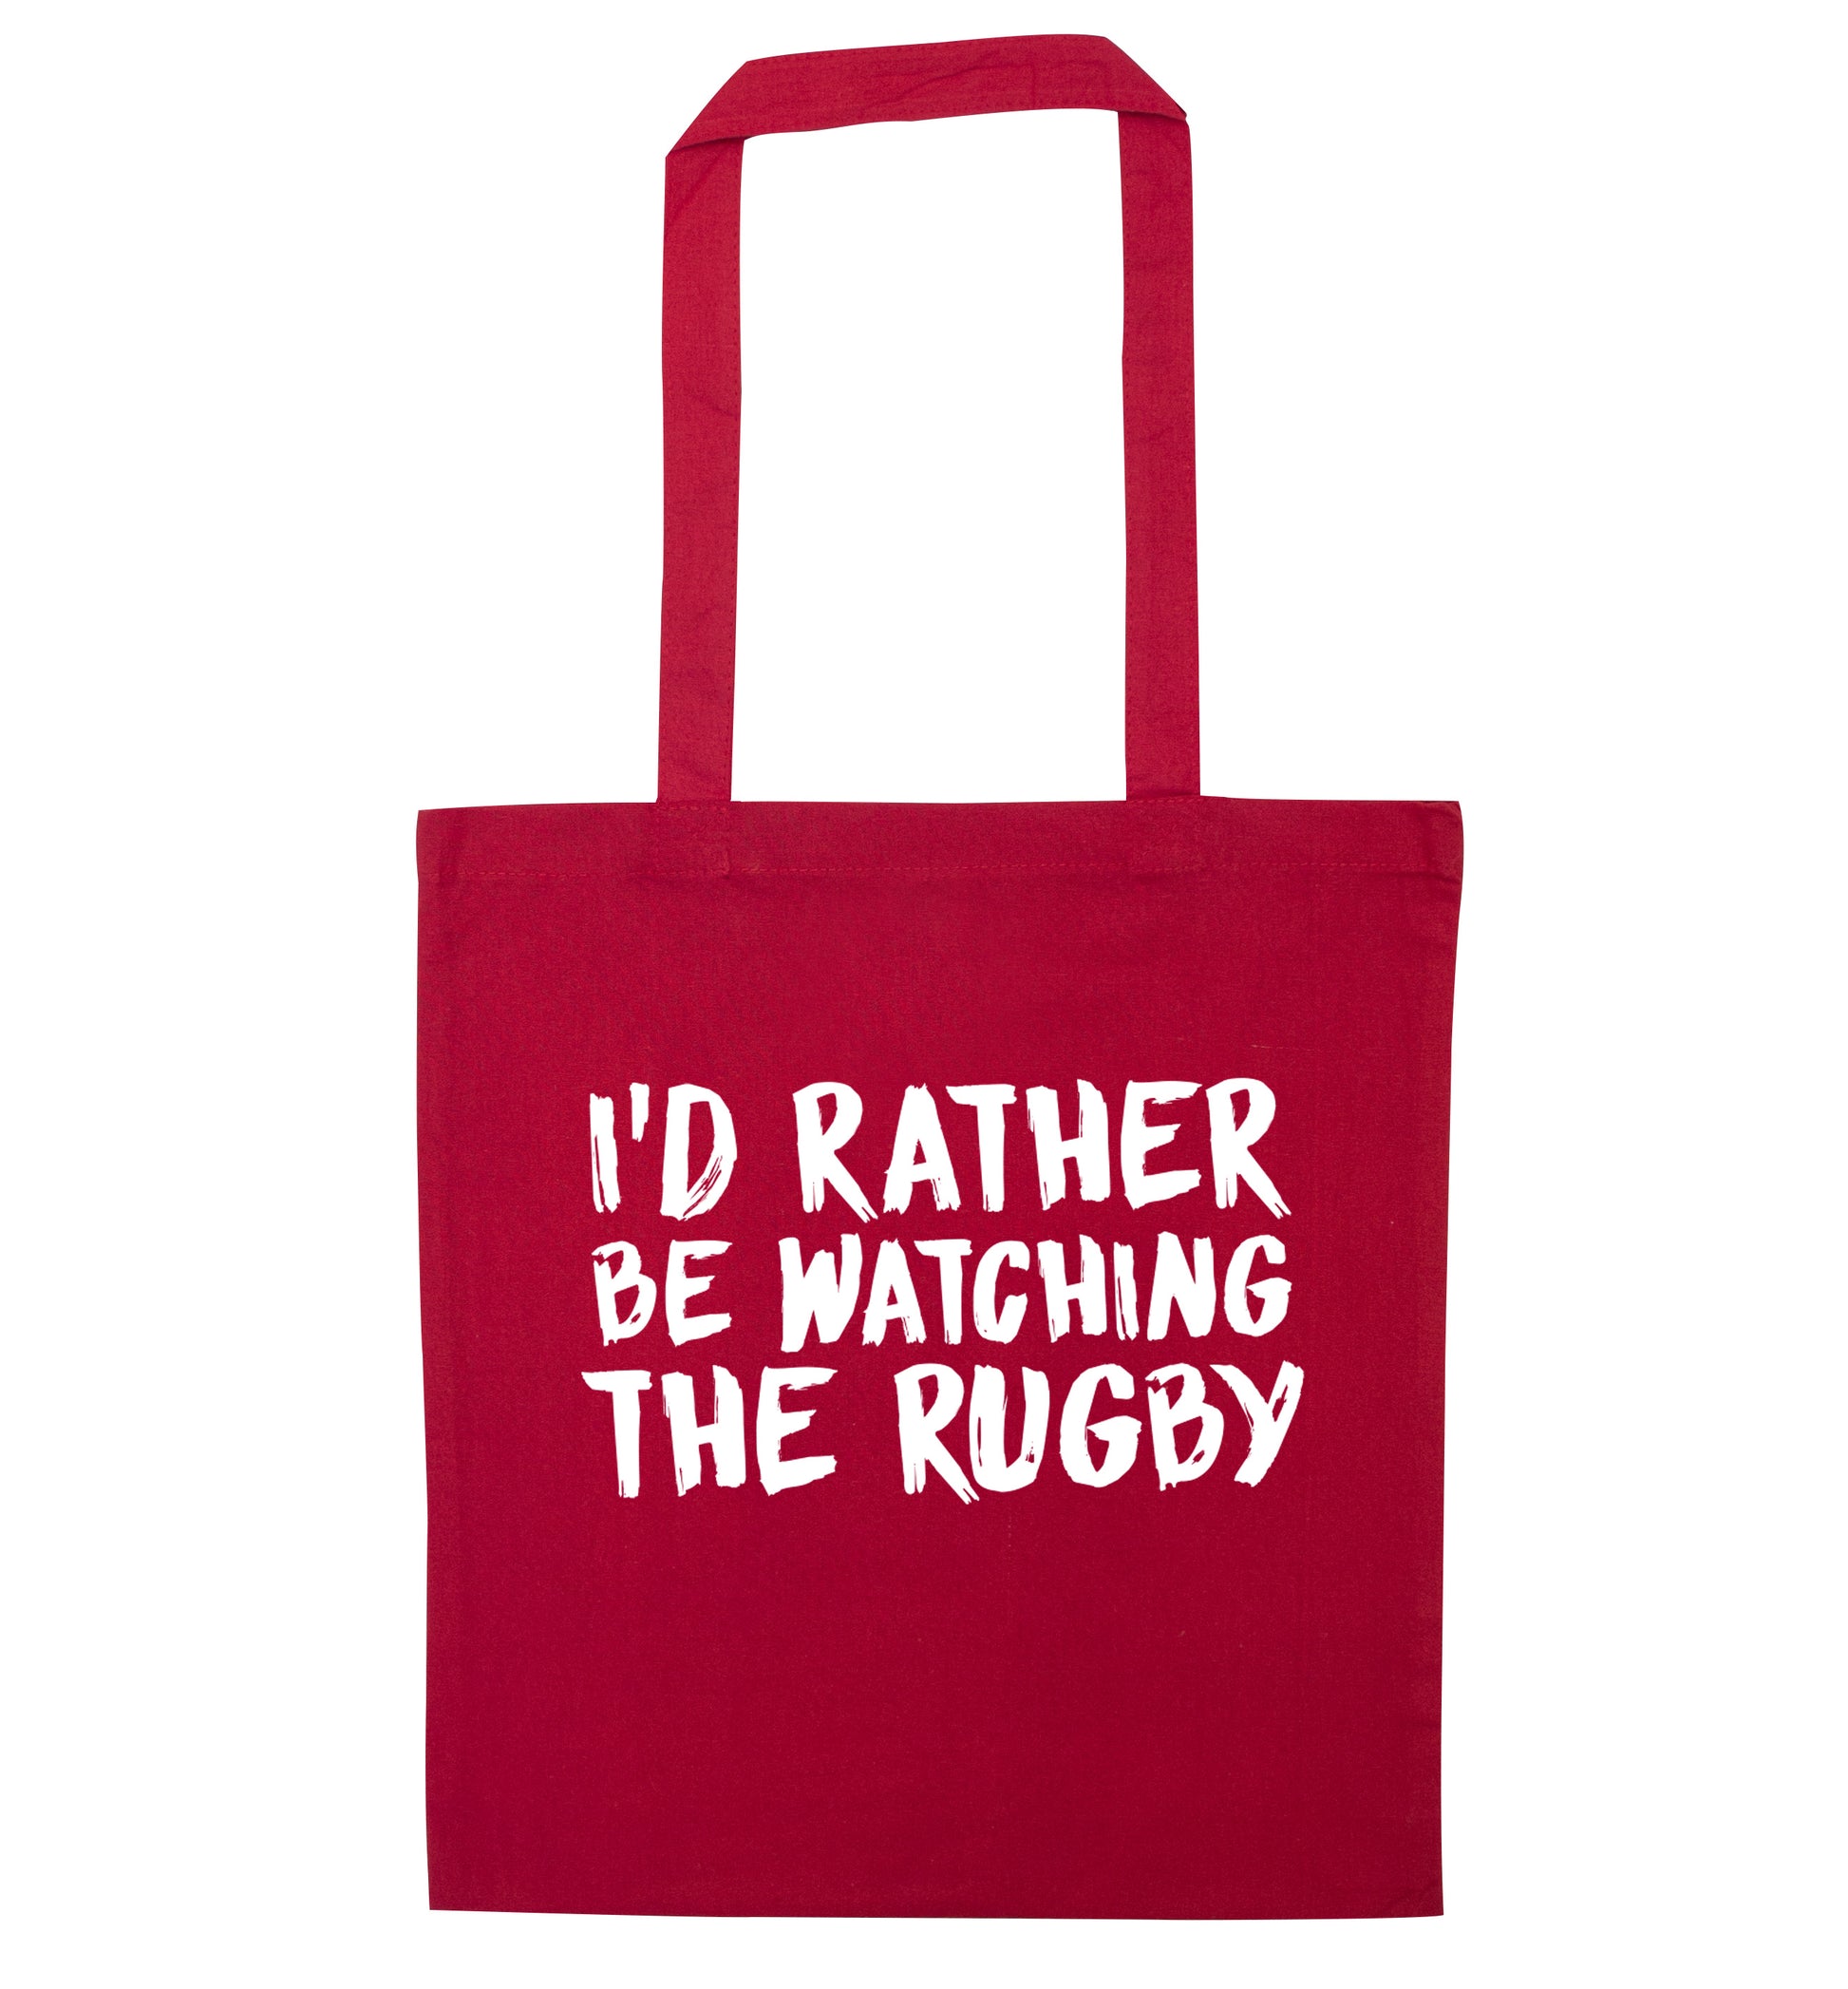 I'd rather be watching the rugby red tote bag